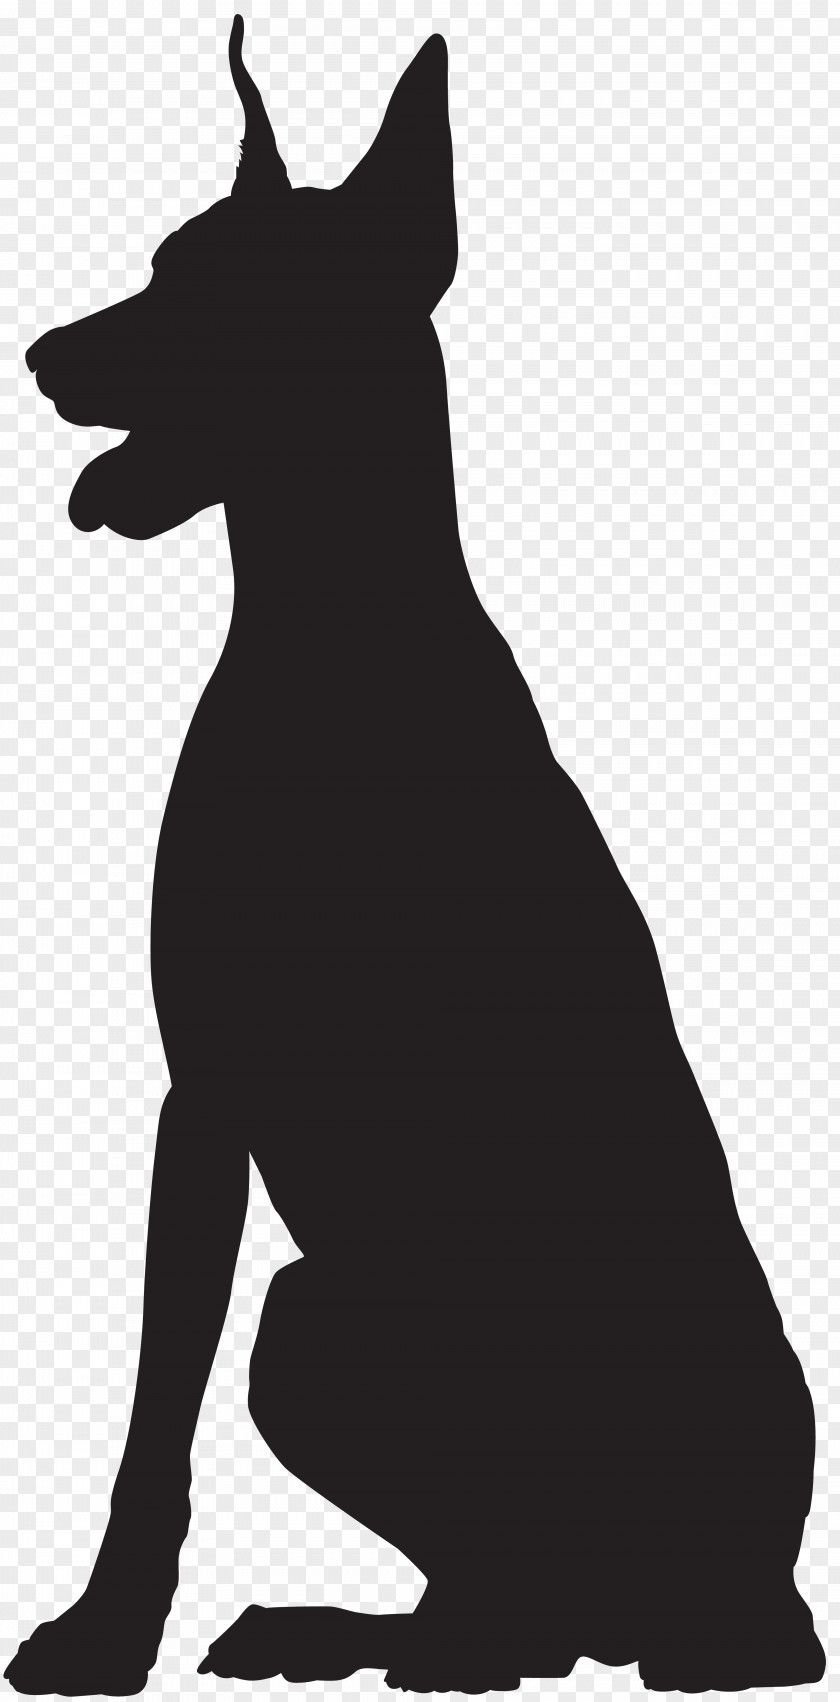 Doberman Silhouette Clip Art Image Dog Breed Black And White Snout PNG